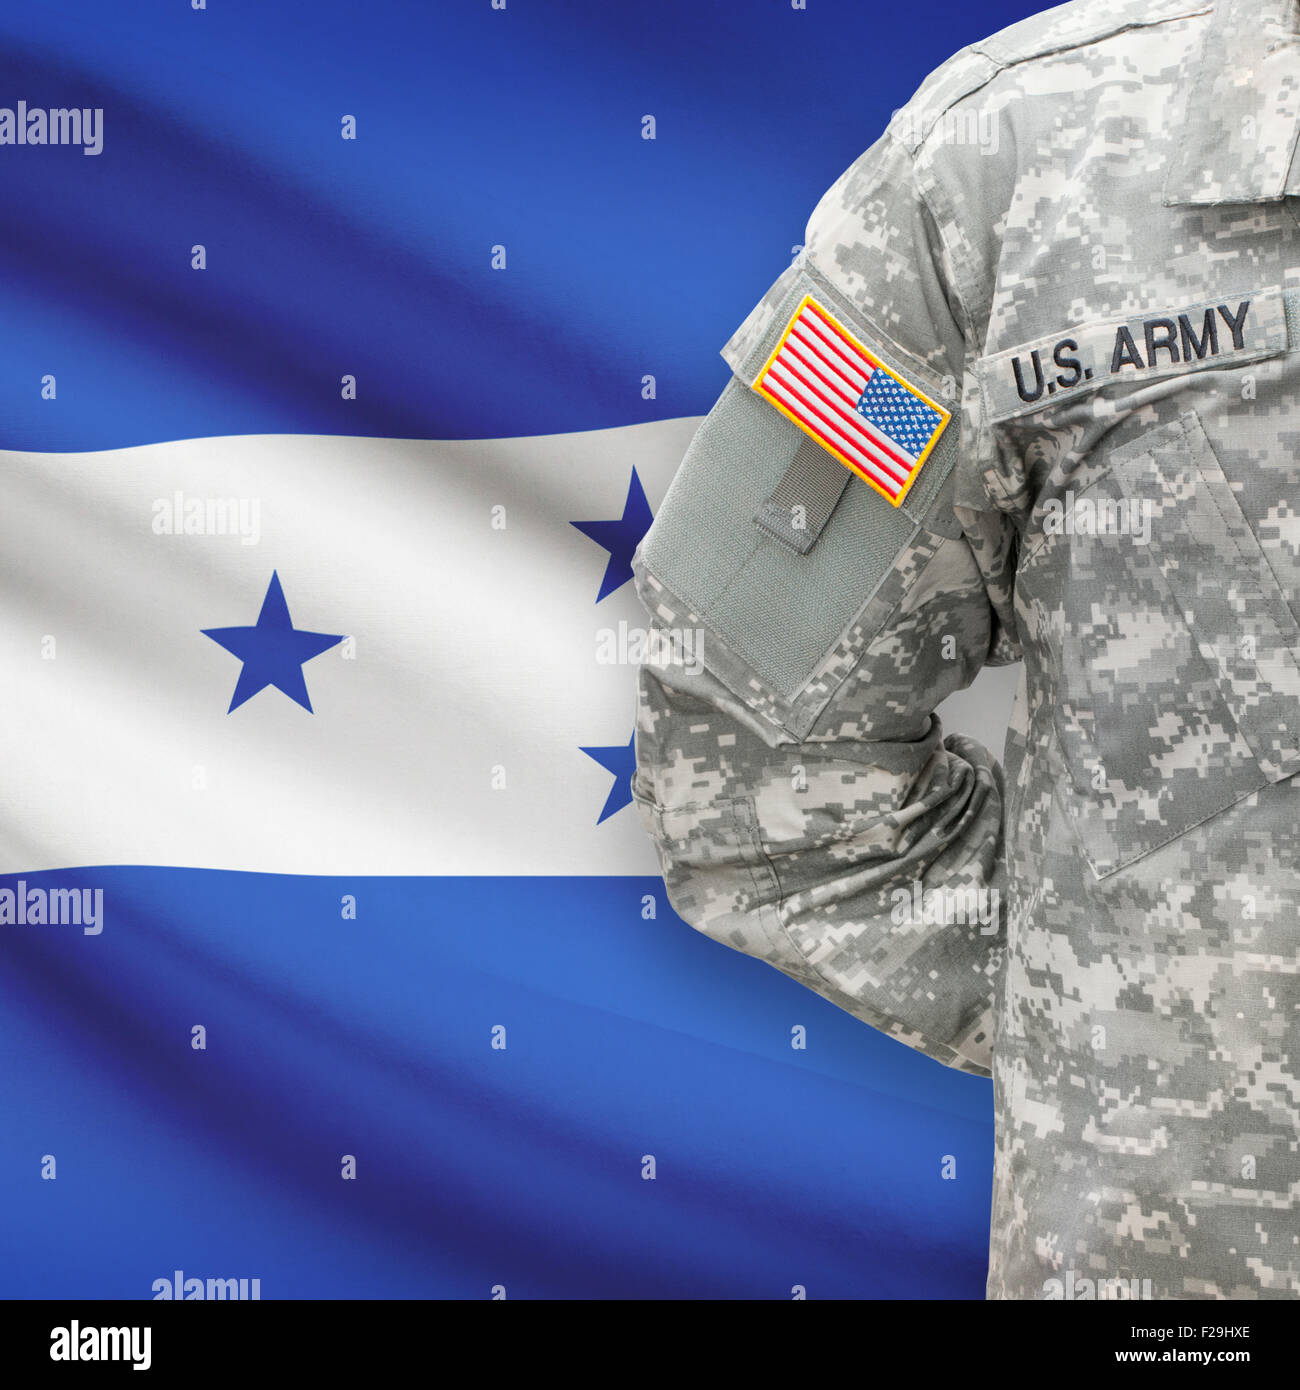 American soldier with flag on background series - Honduras Stock Photo